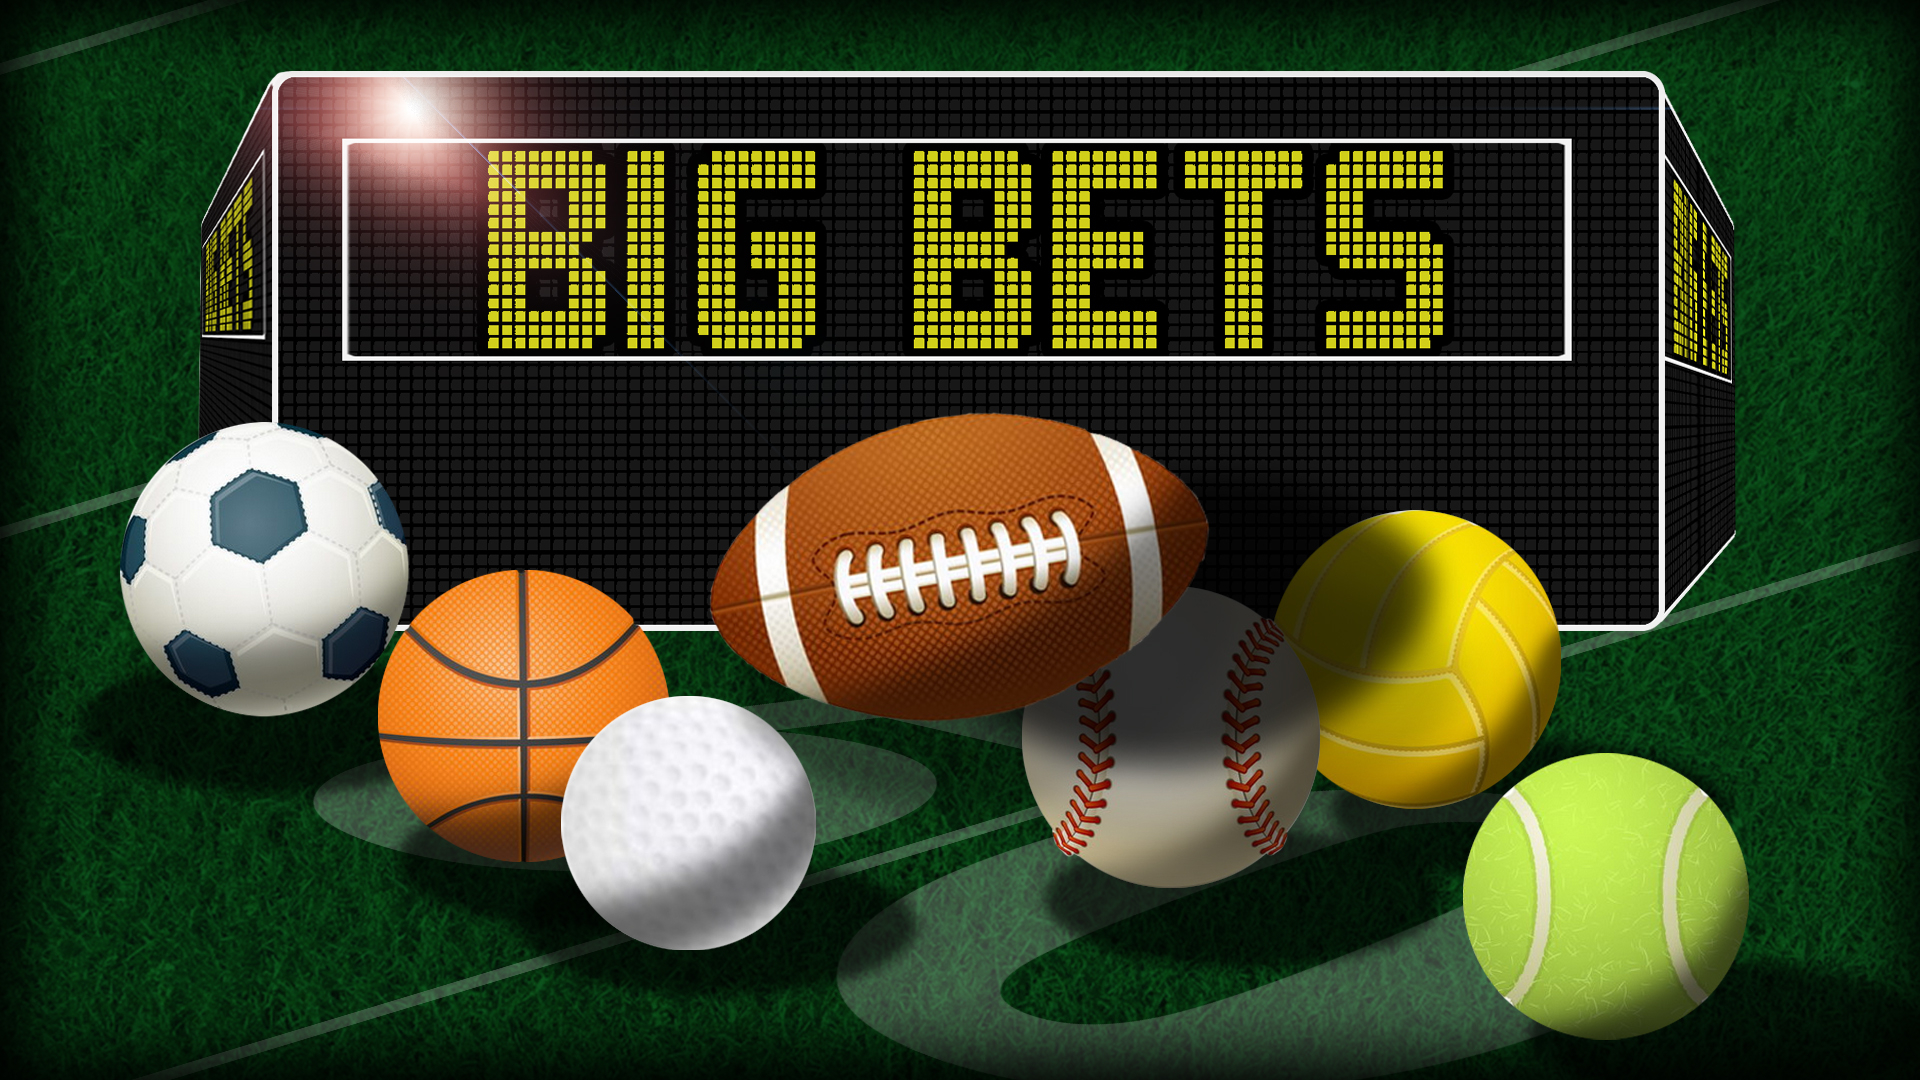 BIG-BETS-MPNOTOR-SPORTS-2-football-in-middle